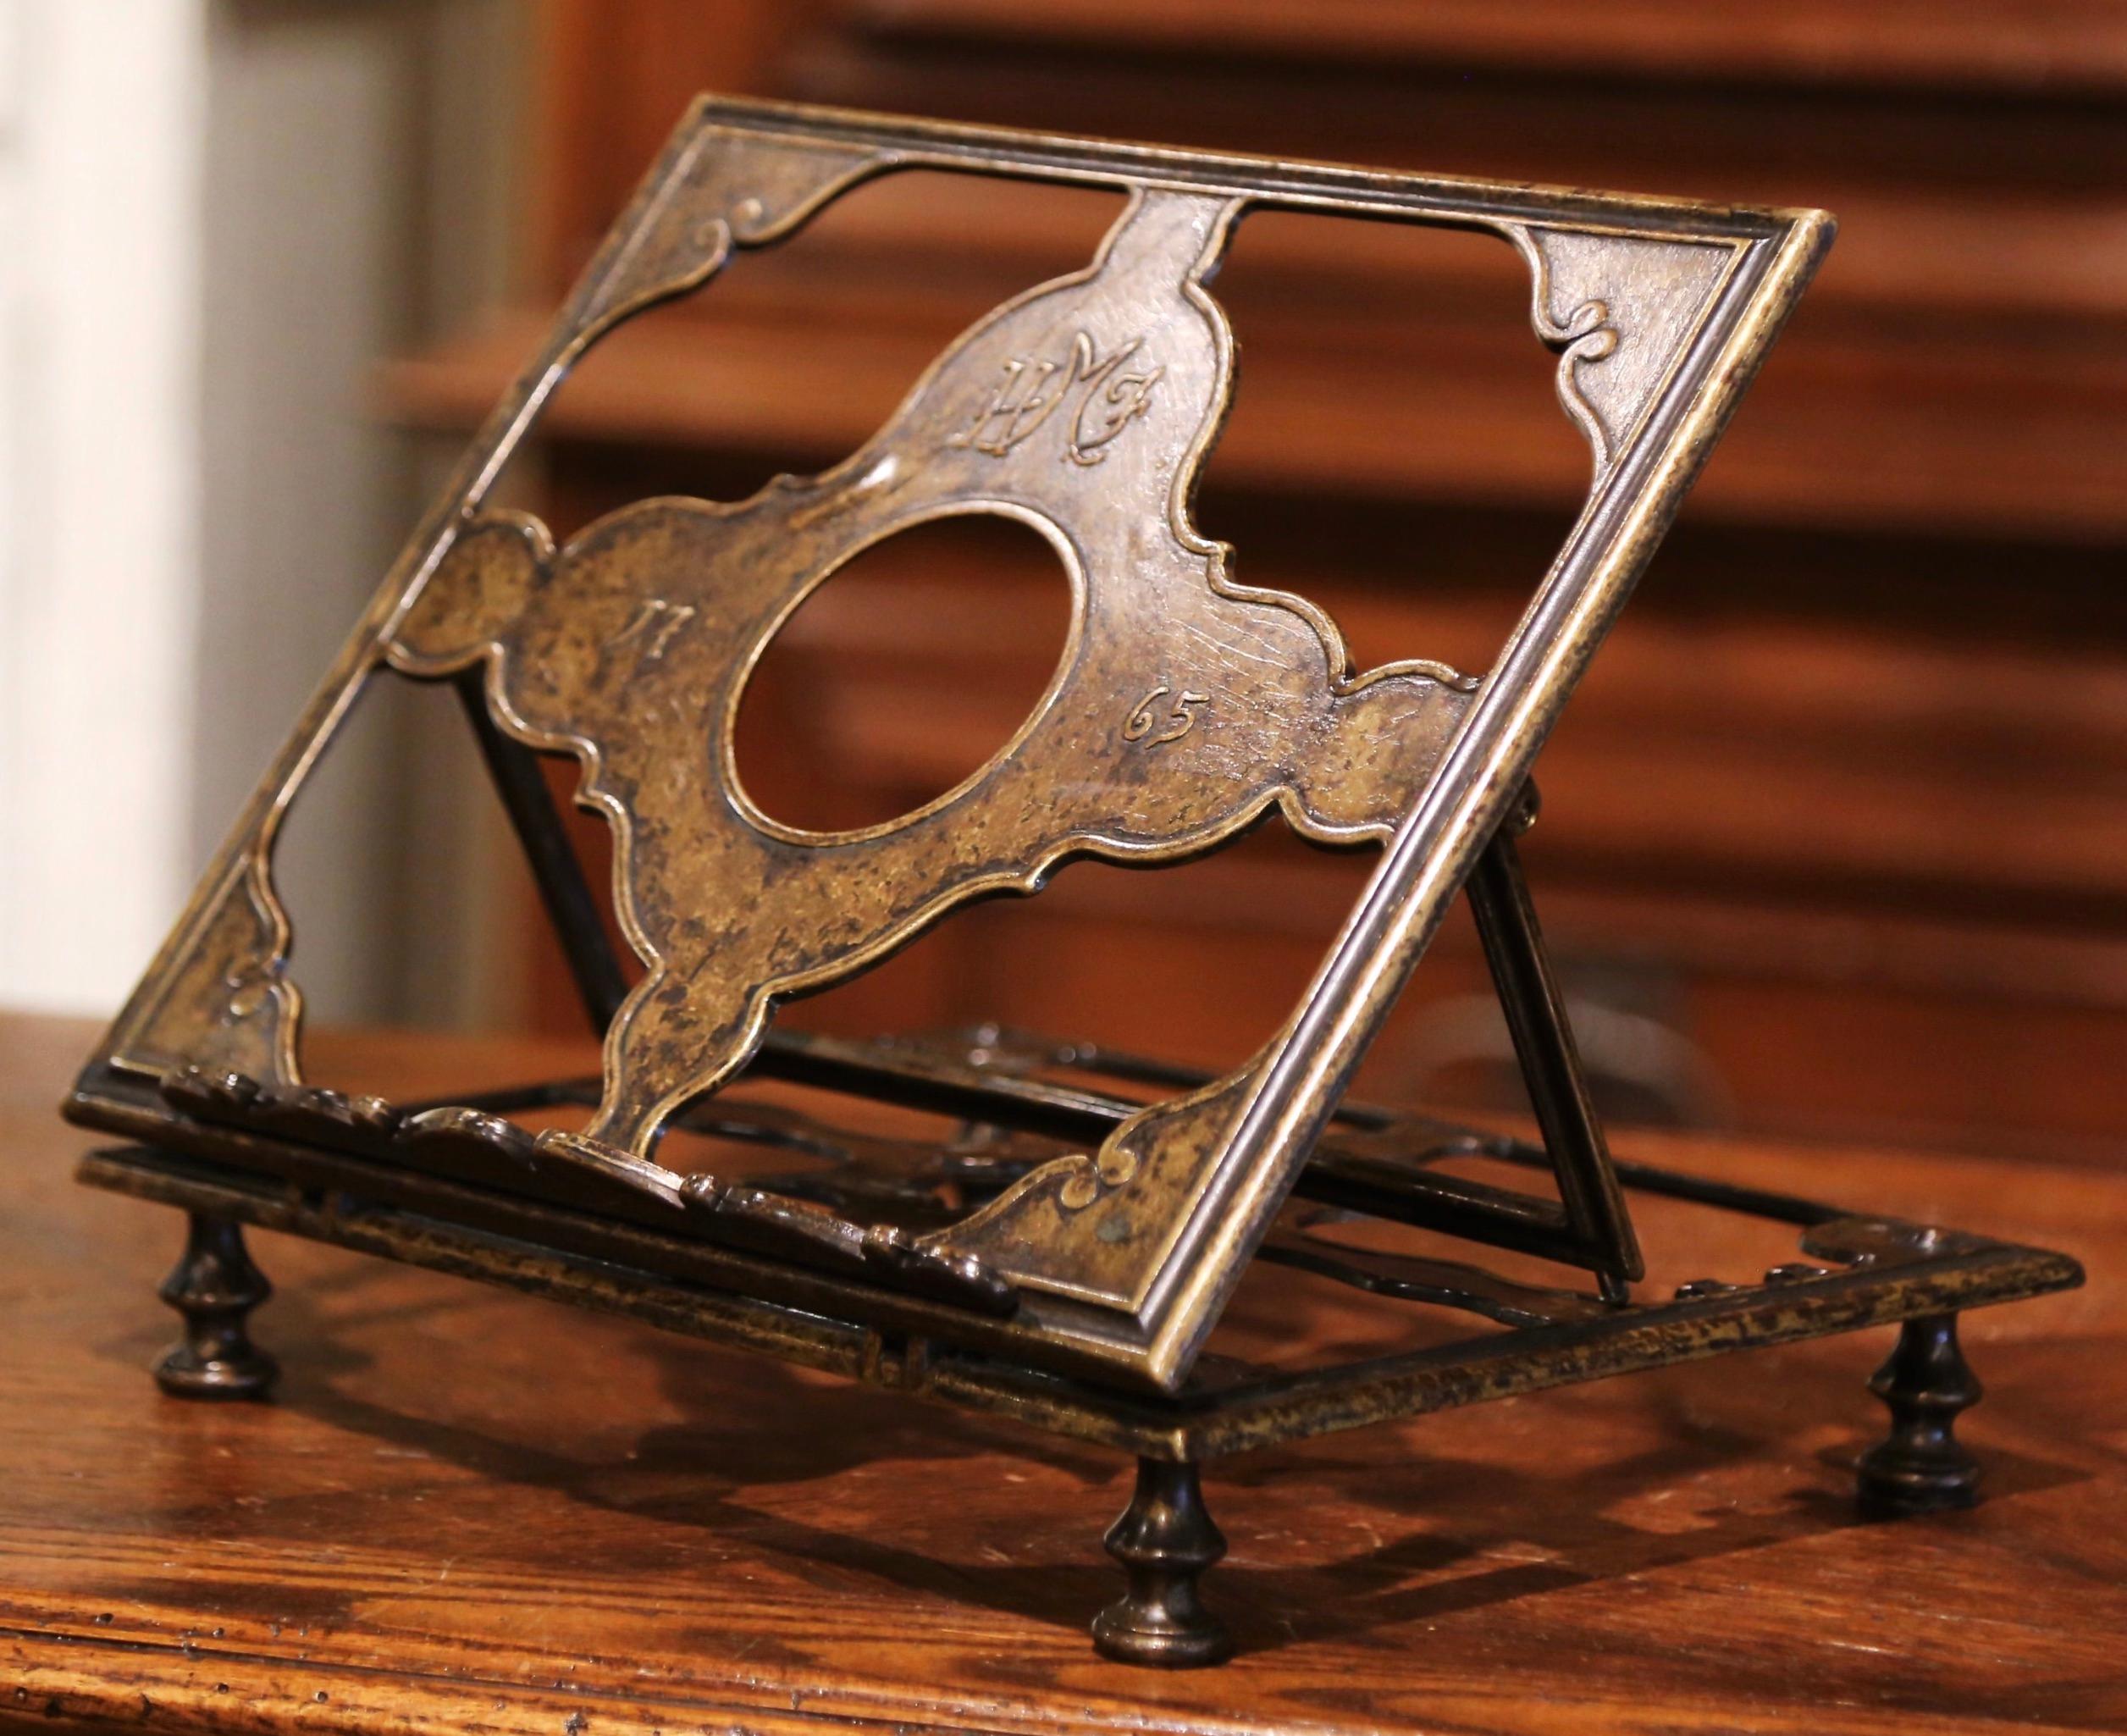 Display your Bible, music score or your favorite recipe book on this decorative, antique stand! Crafted in France circa 1920 and made of bronze, the book holder sits on four small round feet and features an adjustable top decorated with the date